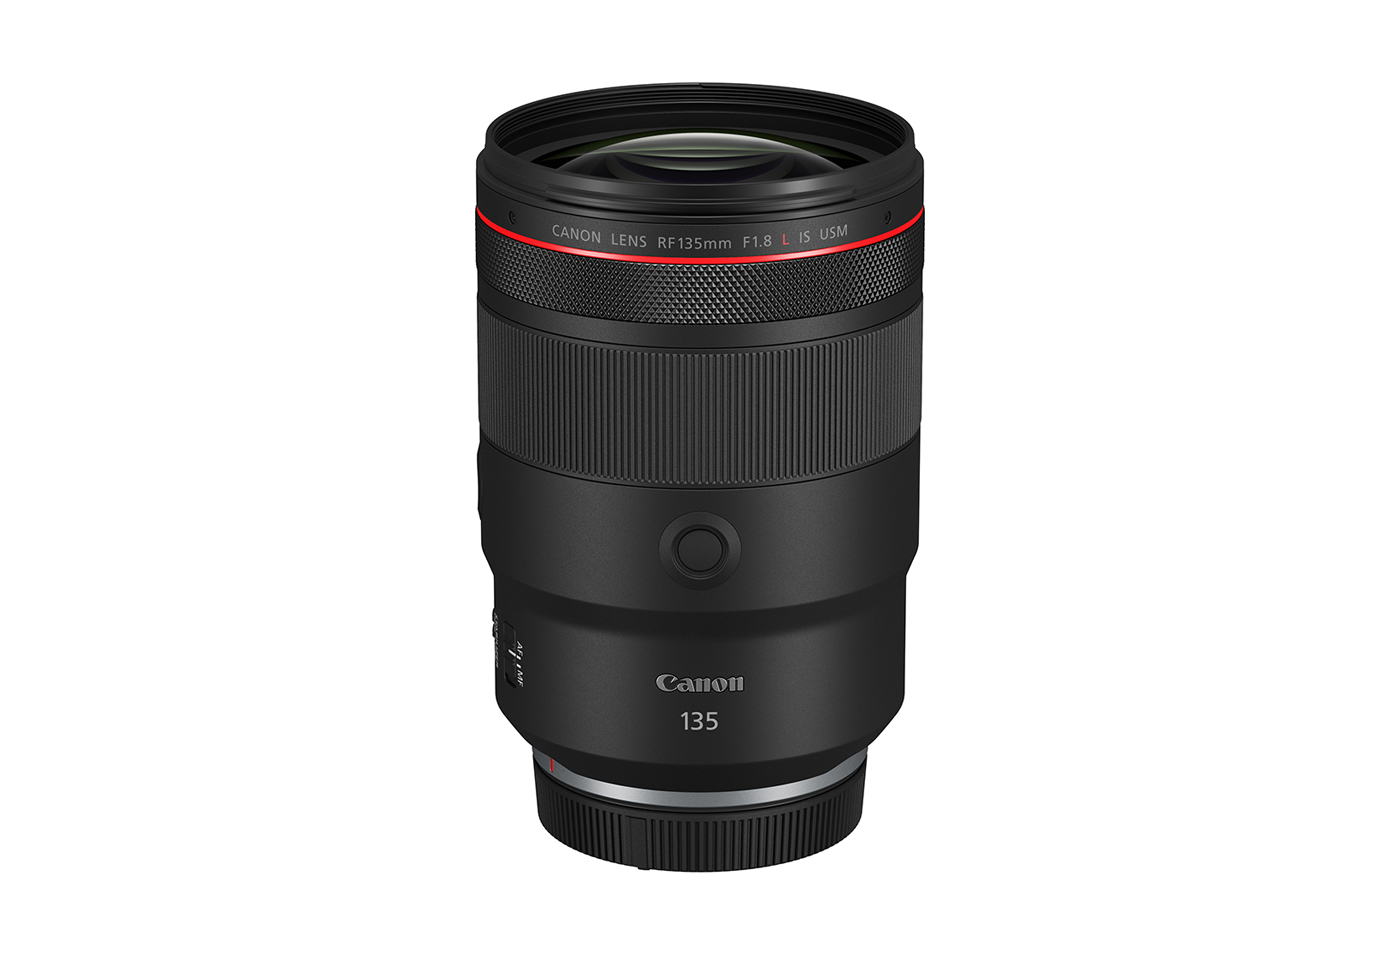 Side profile image of the RF 135mm f/1.8L IS USM prime lens with cap